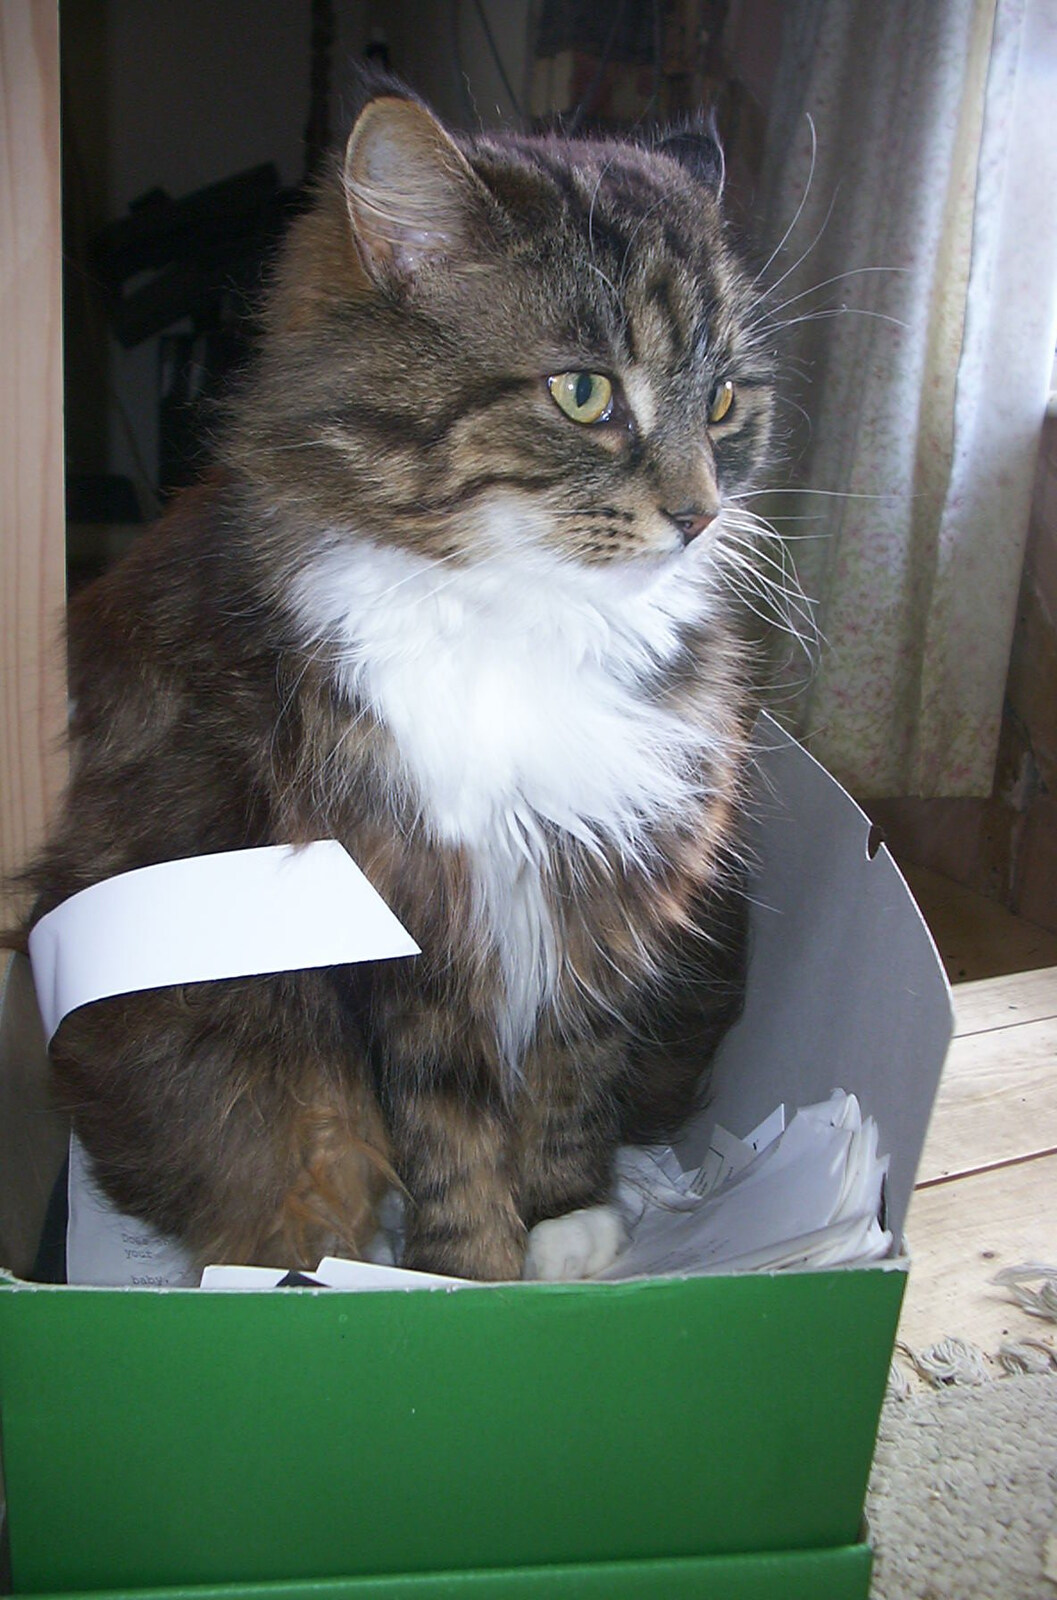 Spammy's Barbeque and A Summer Miscellany - 1st June 2002: More cat-in-a-box